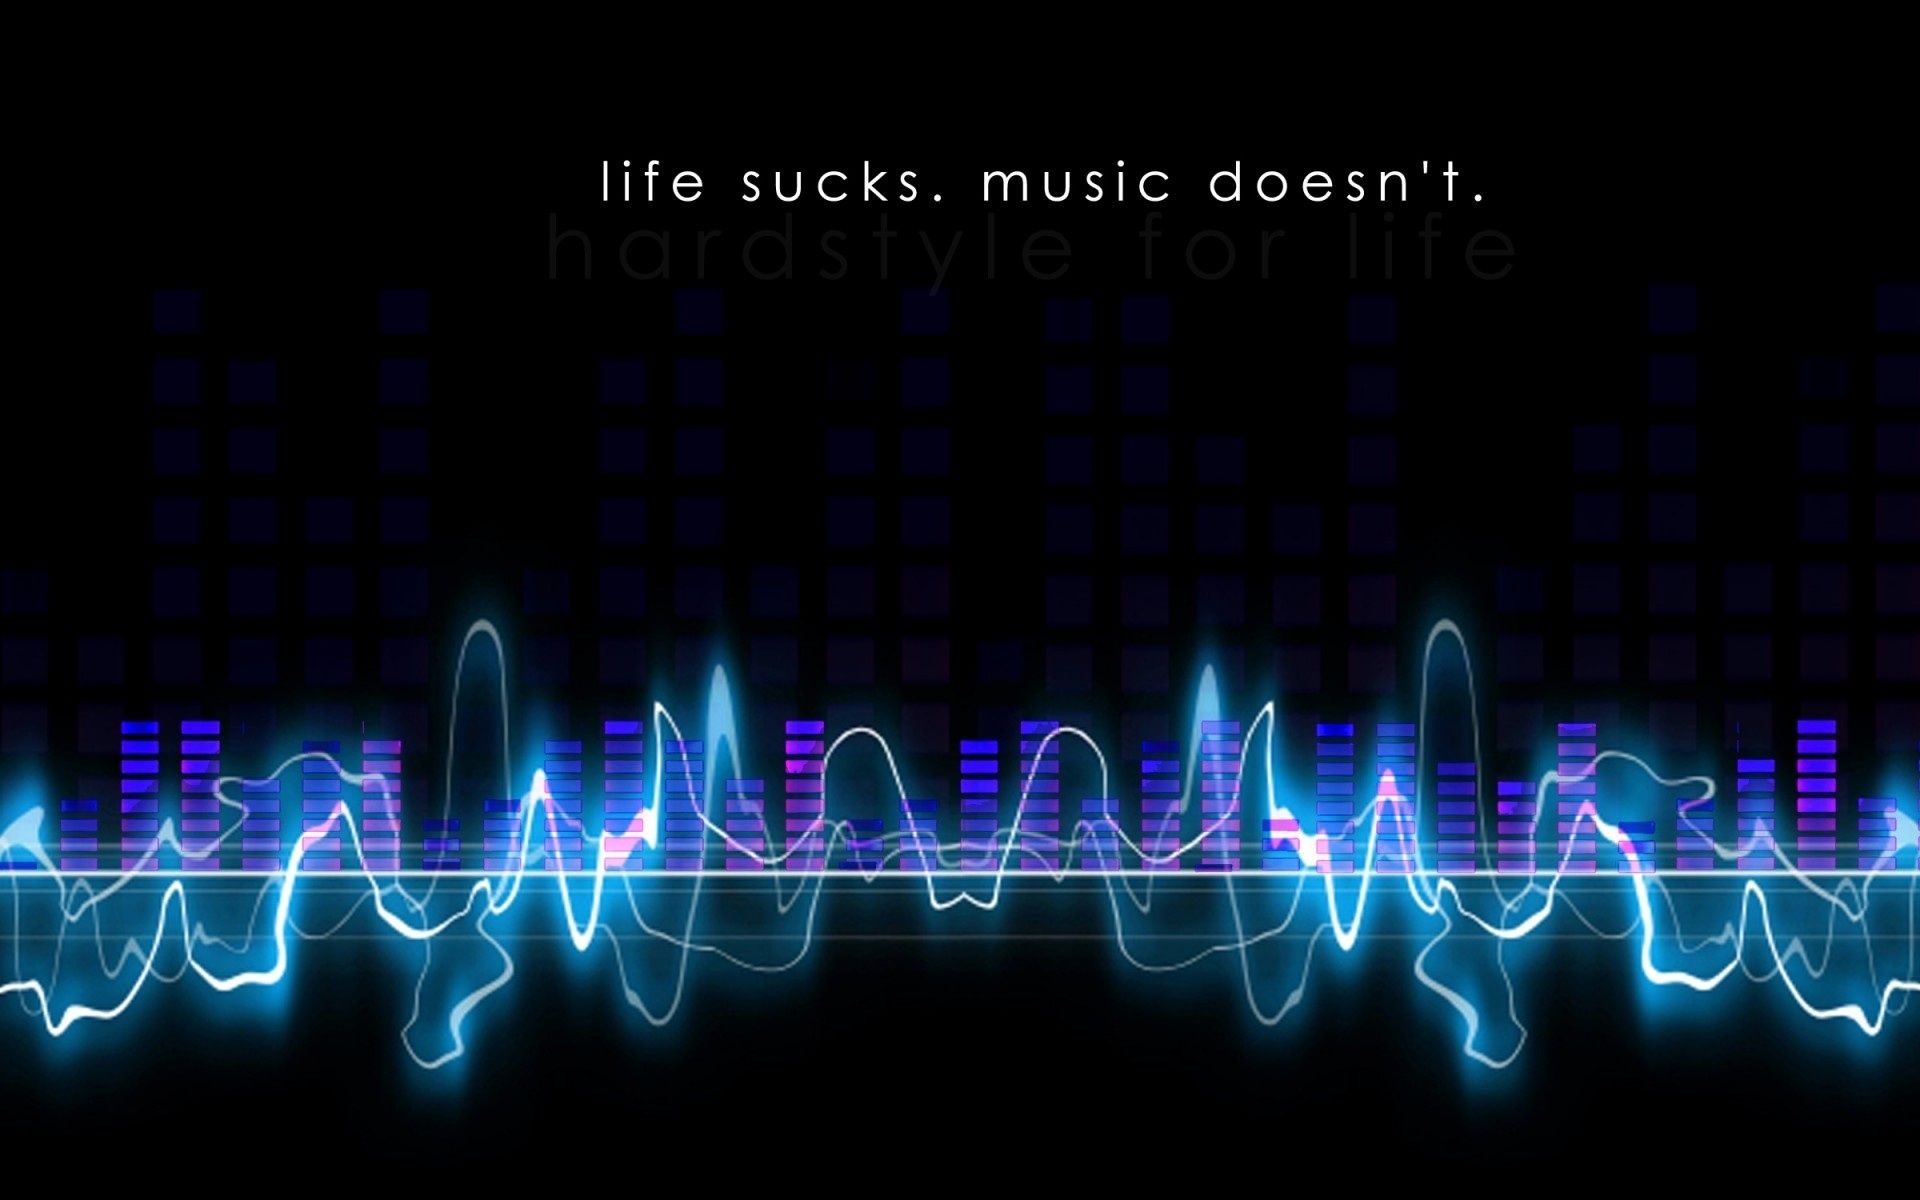 Wallpaper. Music. photo. picture. wave, rhythm, the beat